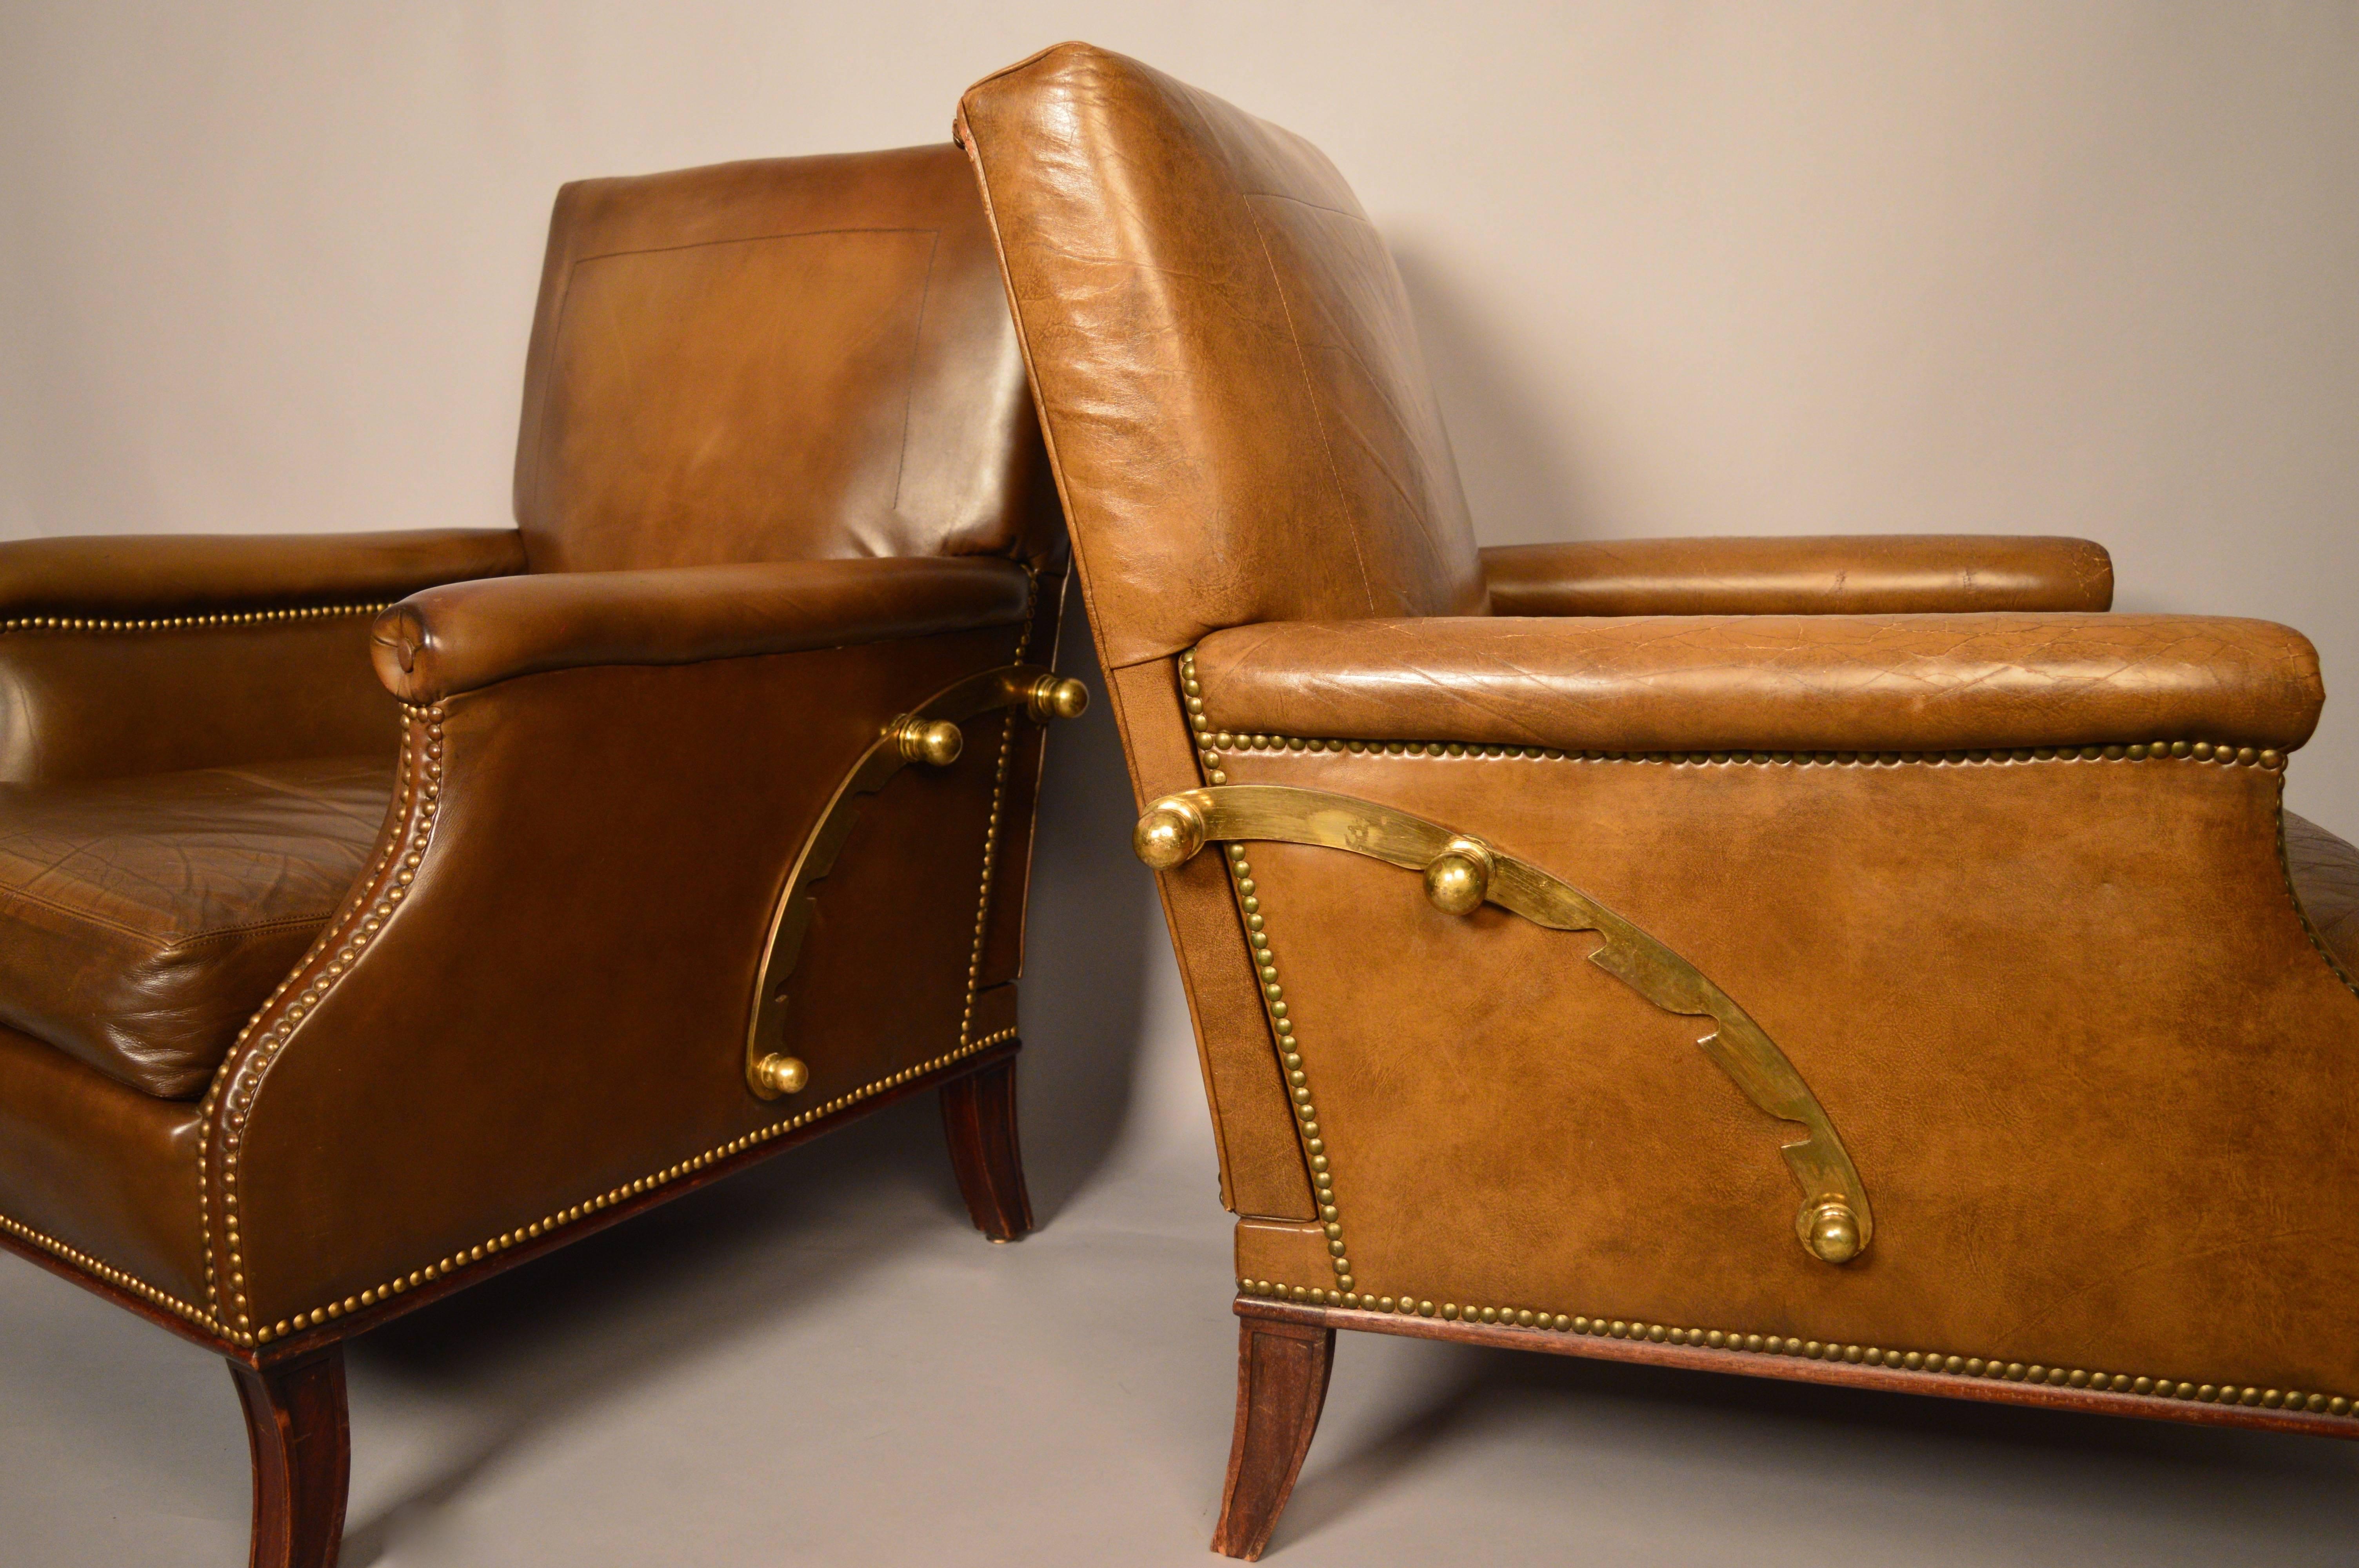 A pair of French neoclassical style armchairs with a brass mechanism that allows the back to recline in three positions.
Original brown leather upholstery and flared tapered mahogany legs.
